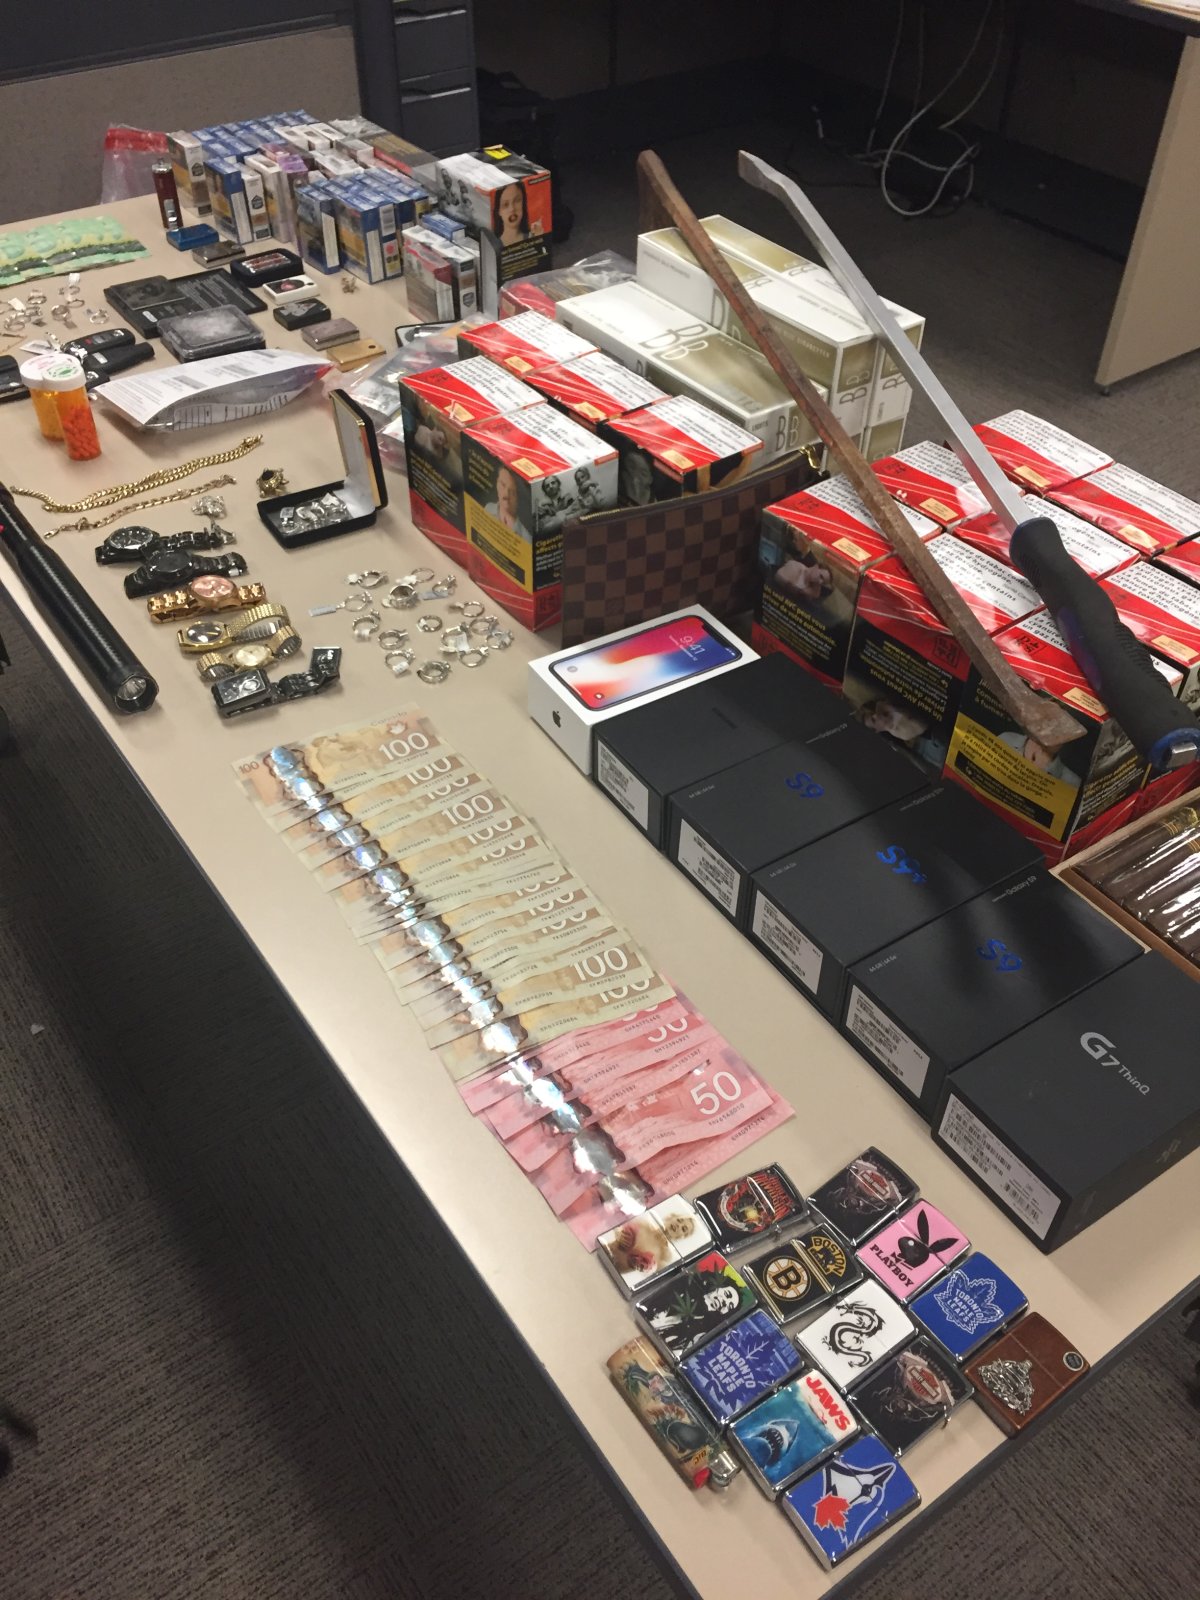 Halton Police have recovered thousands of dollars in stolen property from a Hamilton home.